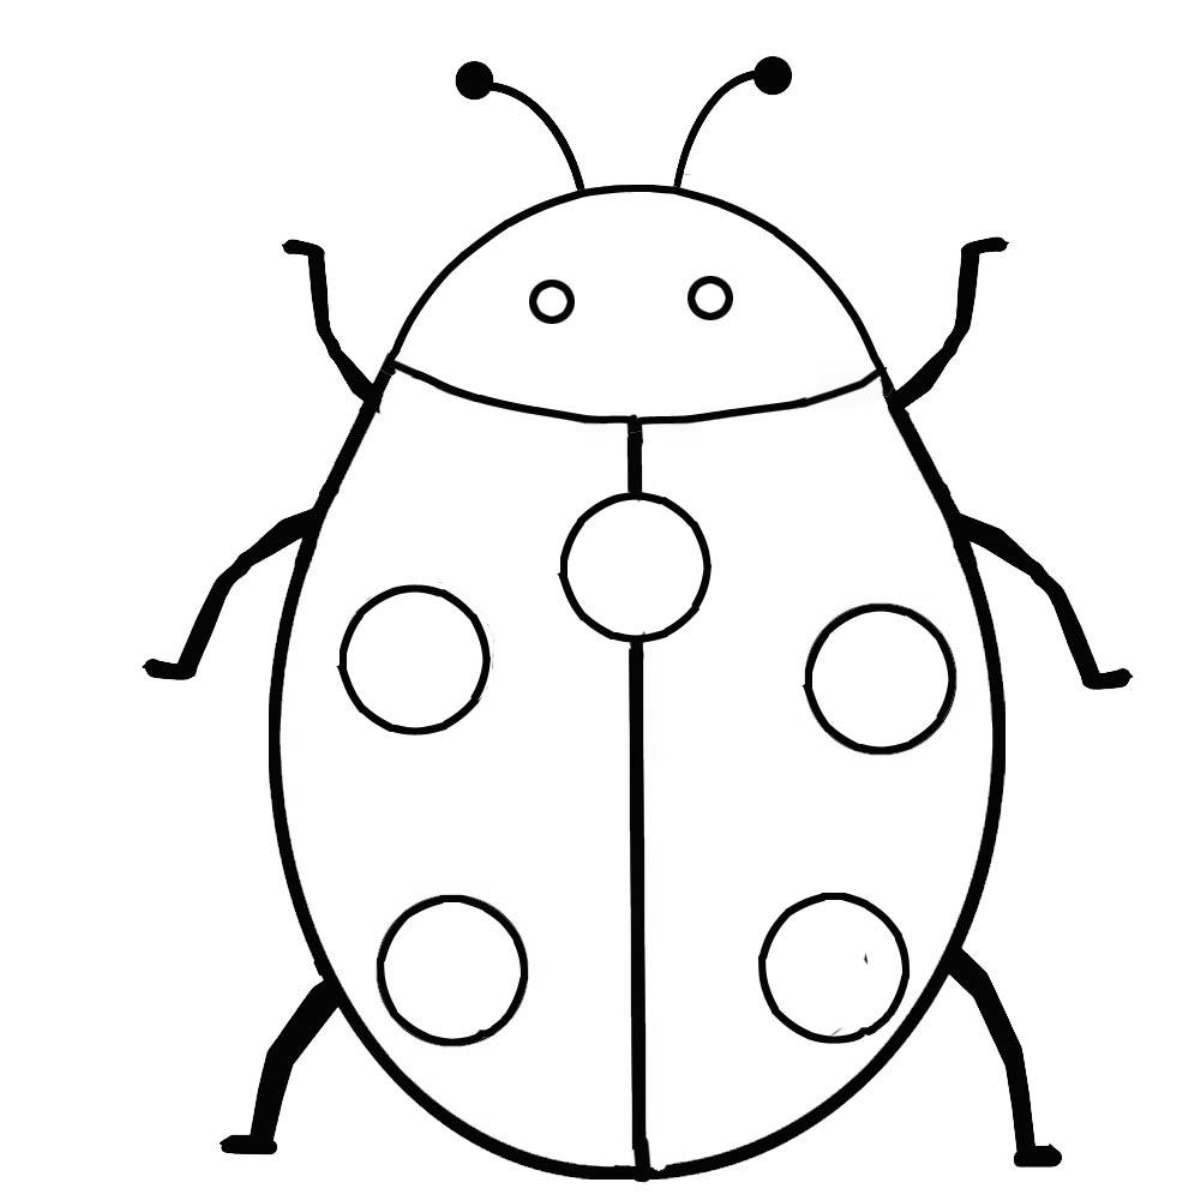 Cute insects coloring pages for kids